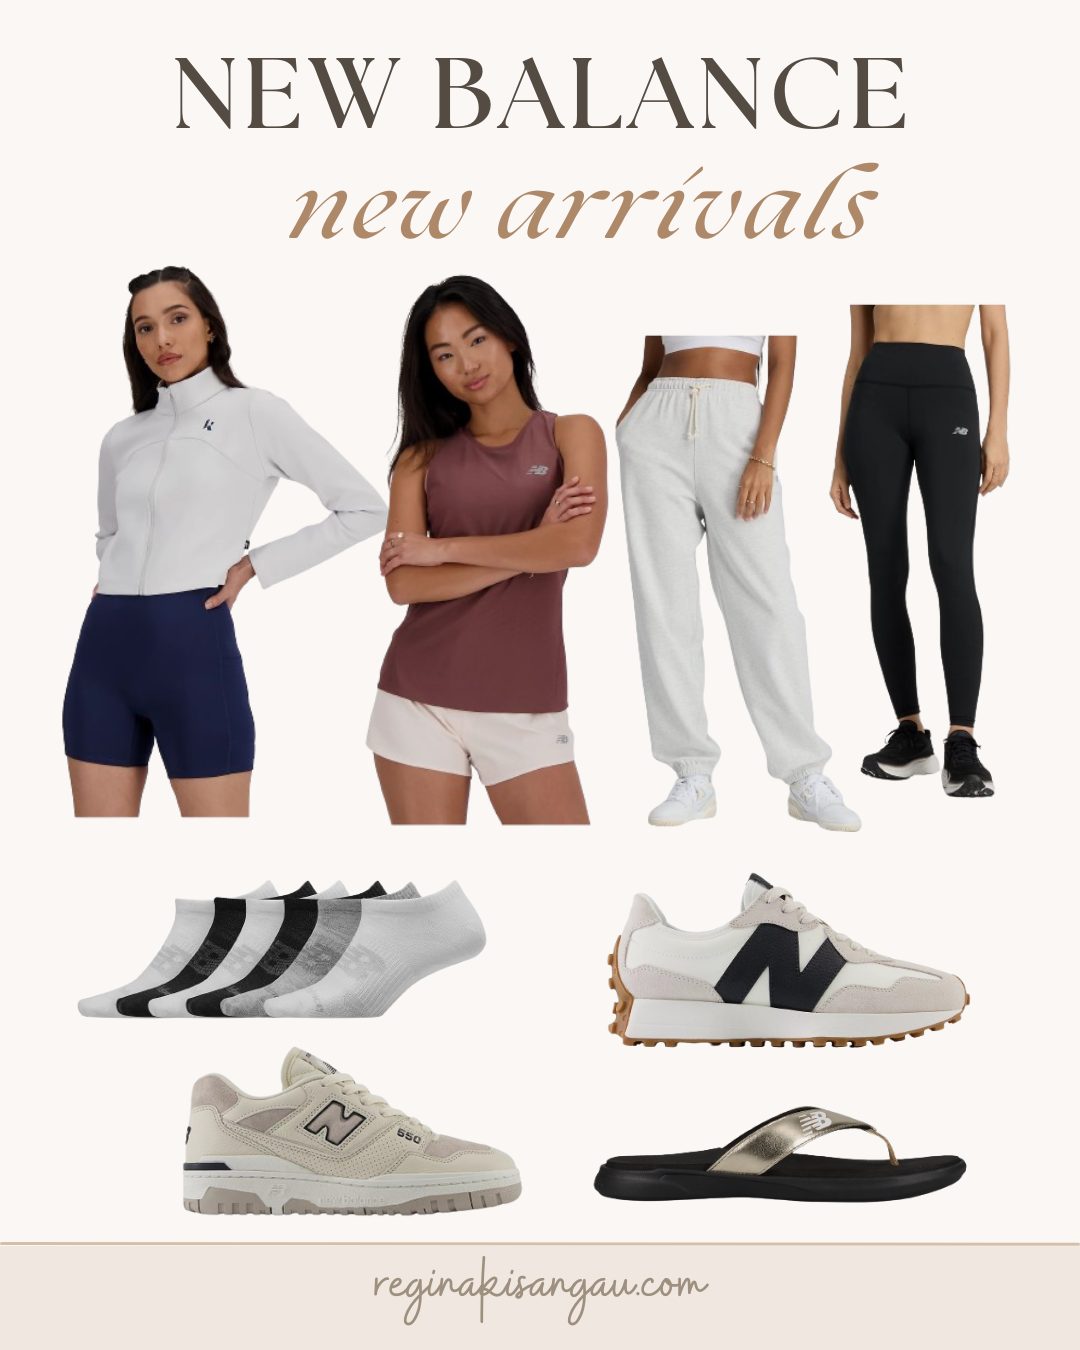 New Balance’s Latest Arrivals in Women’s Fitness Apparel